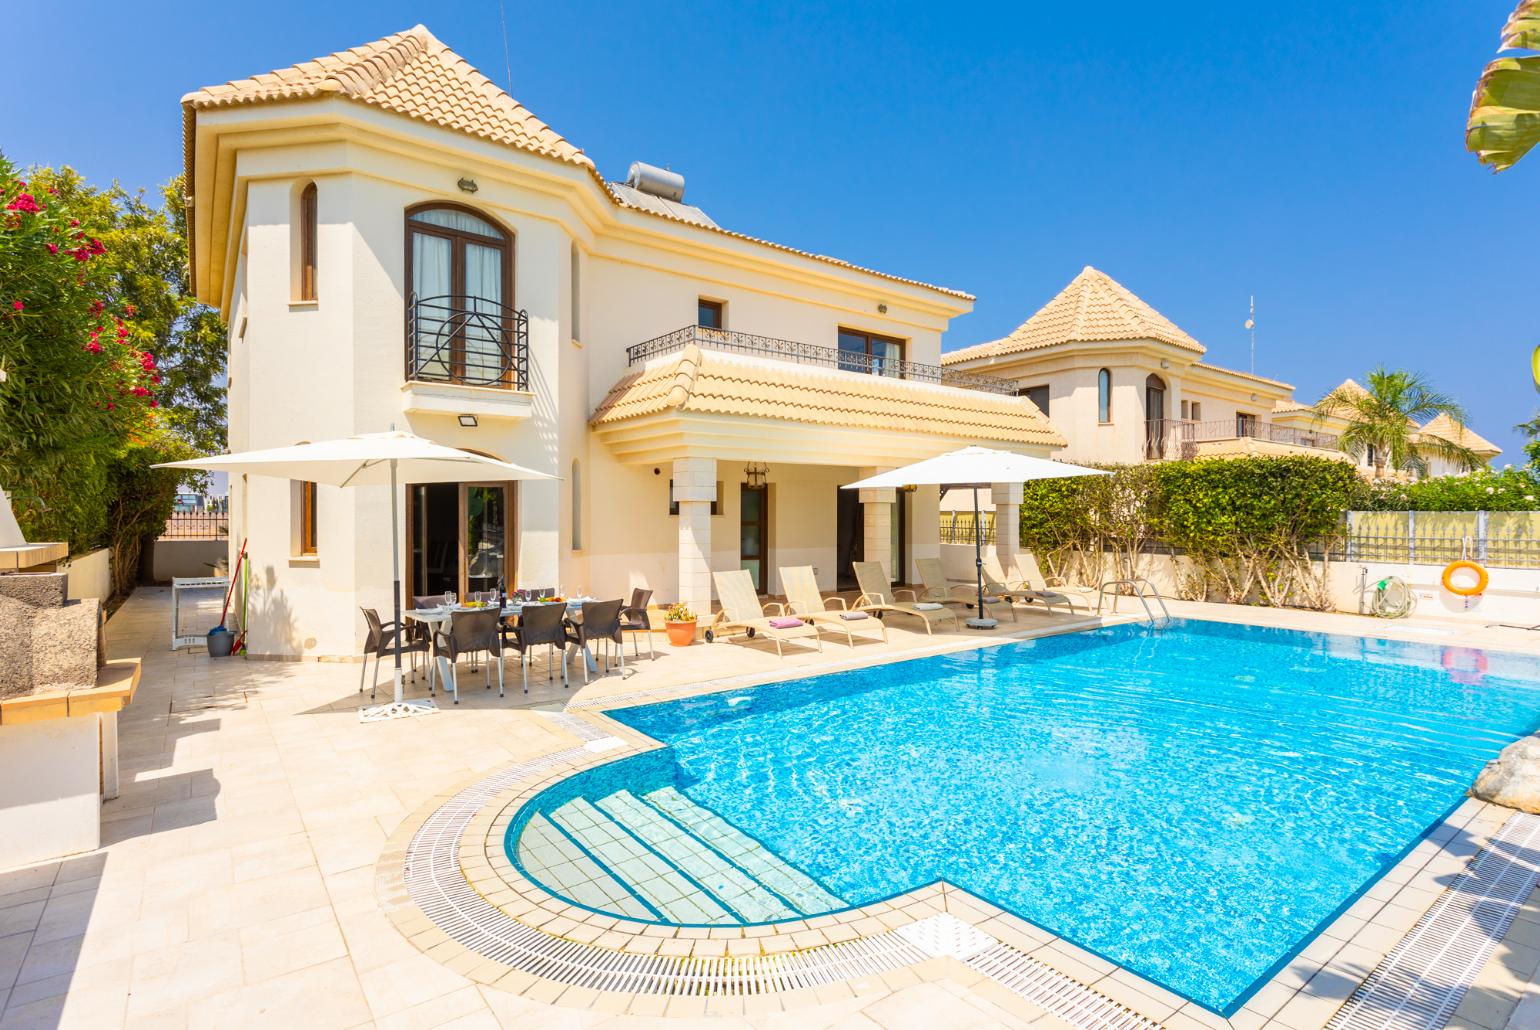 ,Beautiful villa with private pool, jacuzzi, terrace, and garden with sea views